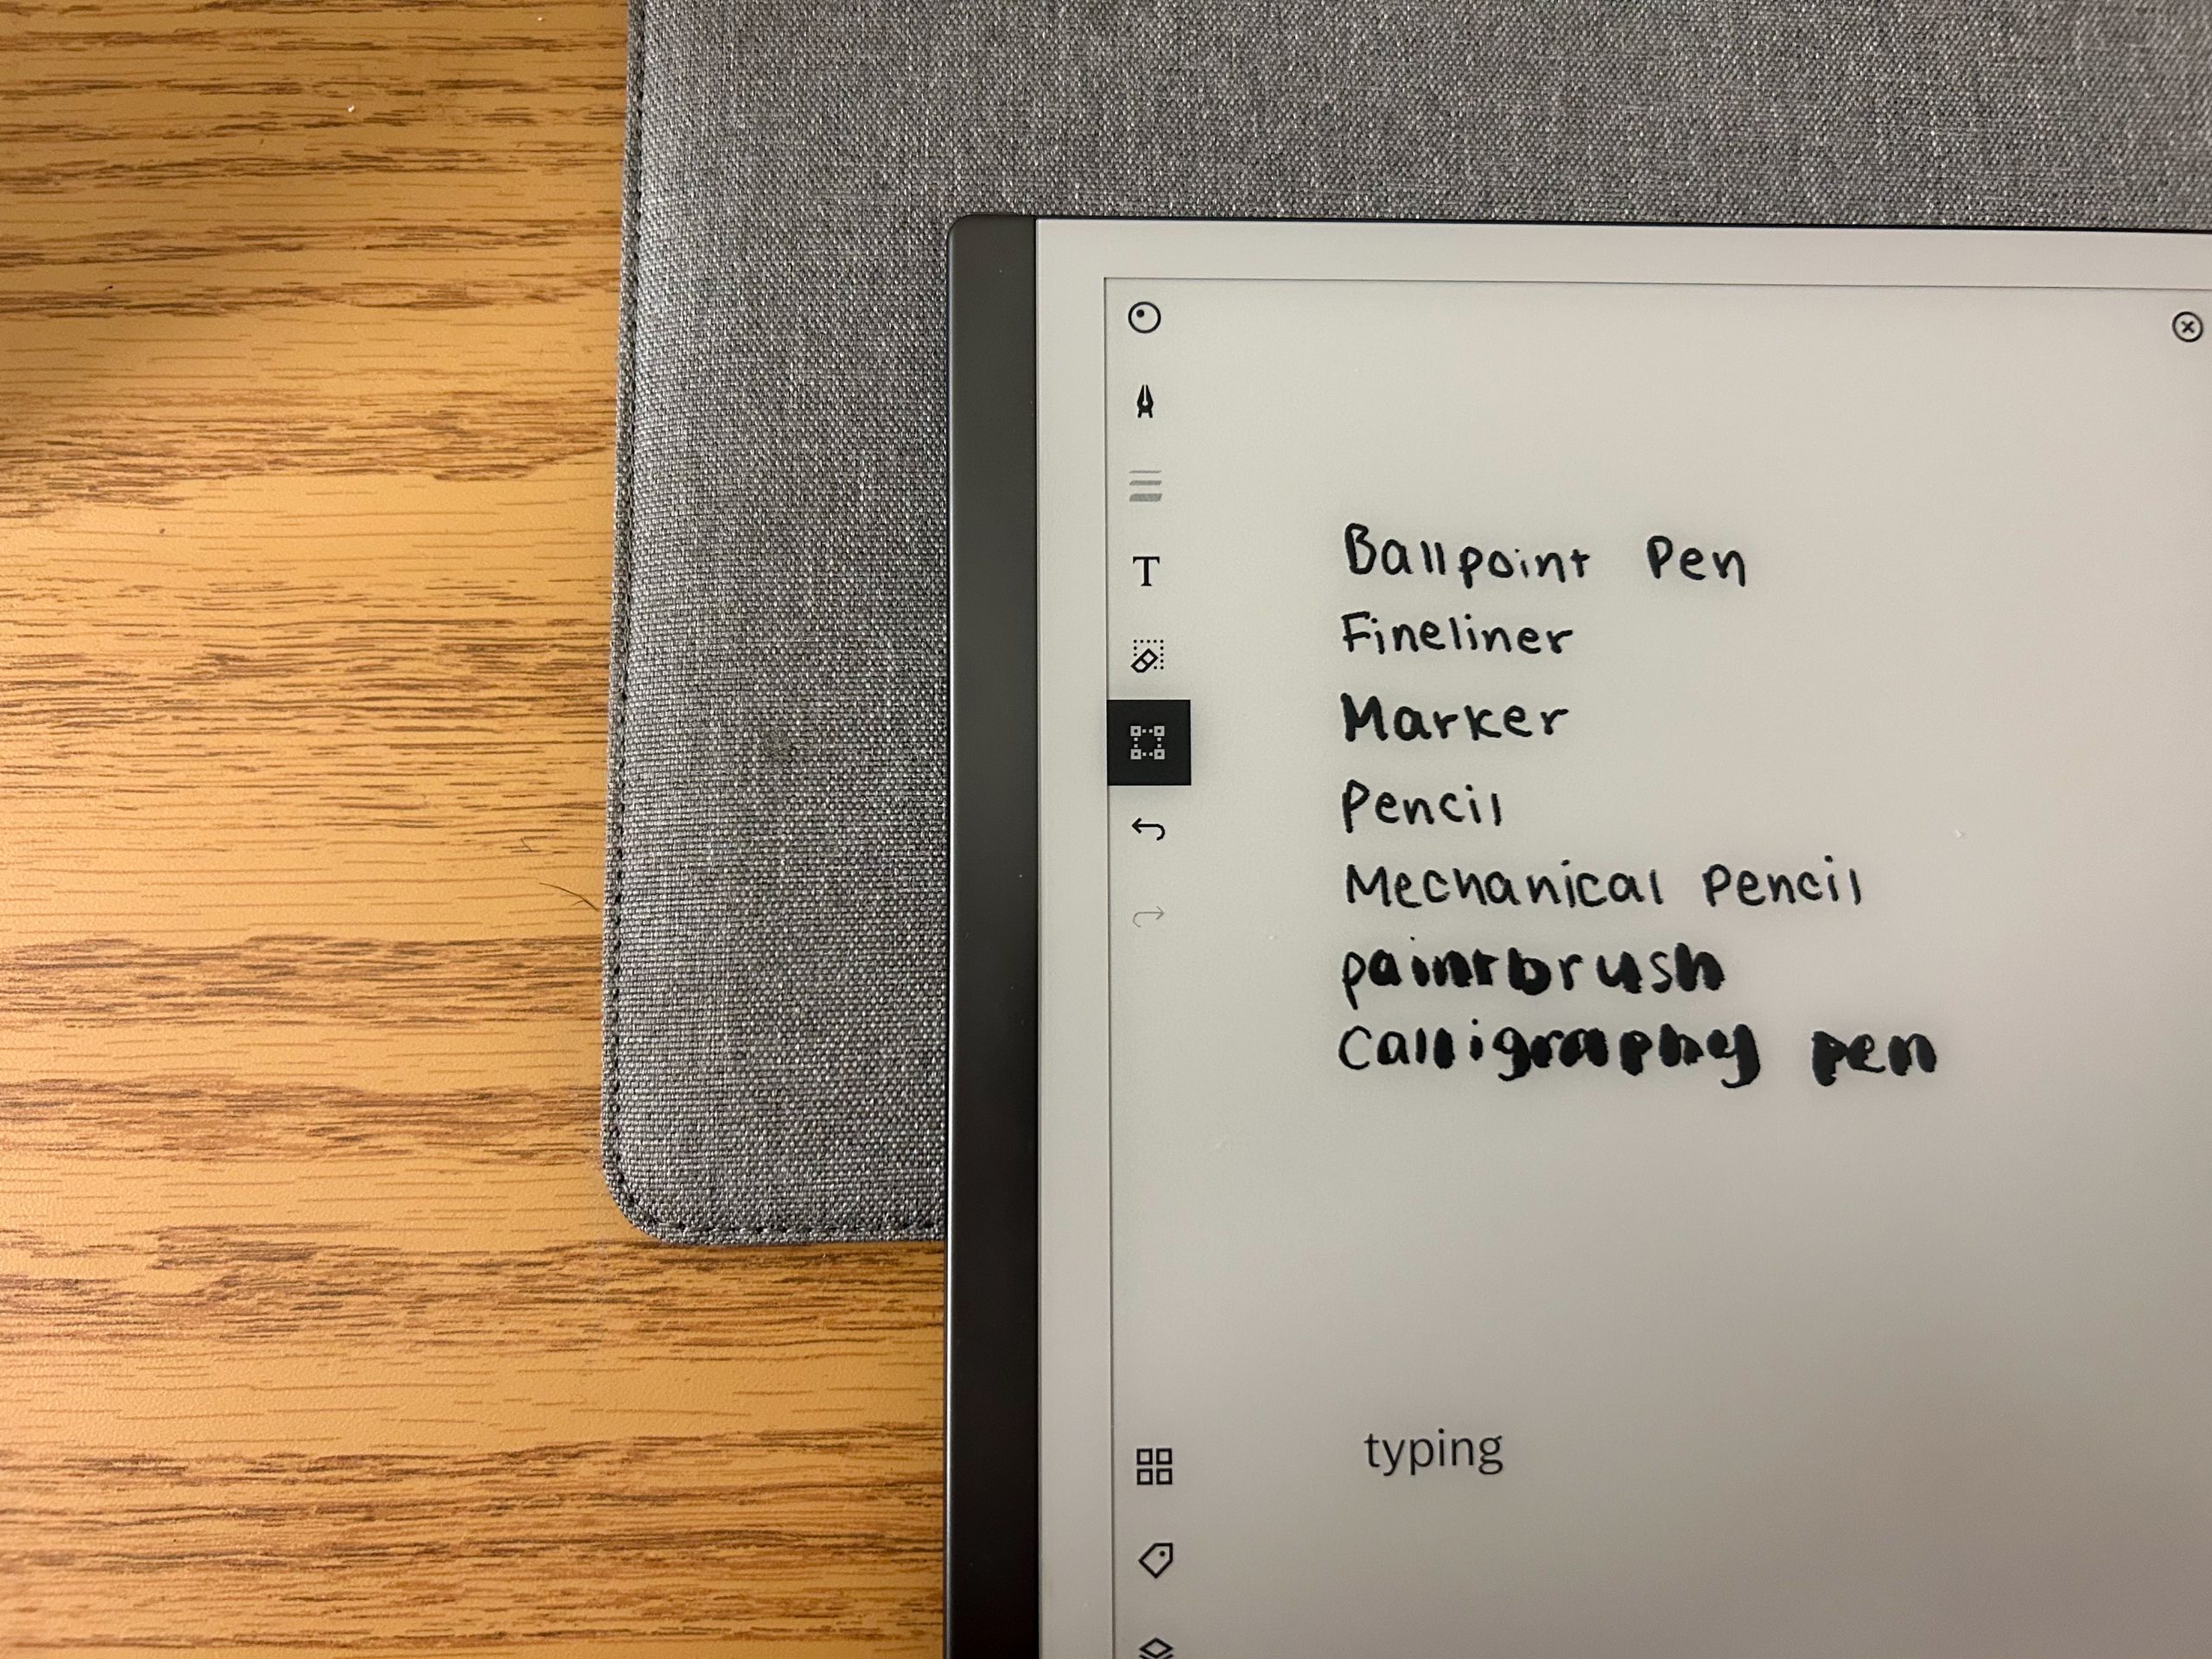 Remarkable 2 review: The writing tablet that changed my life